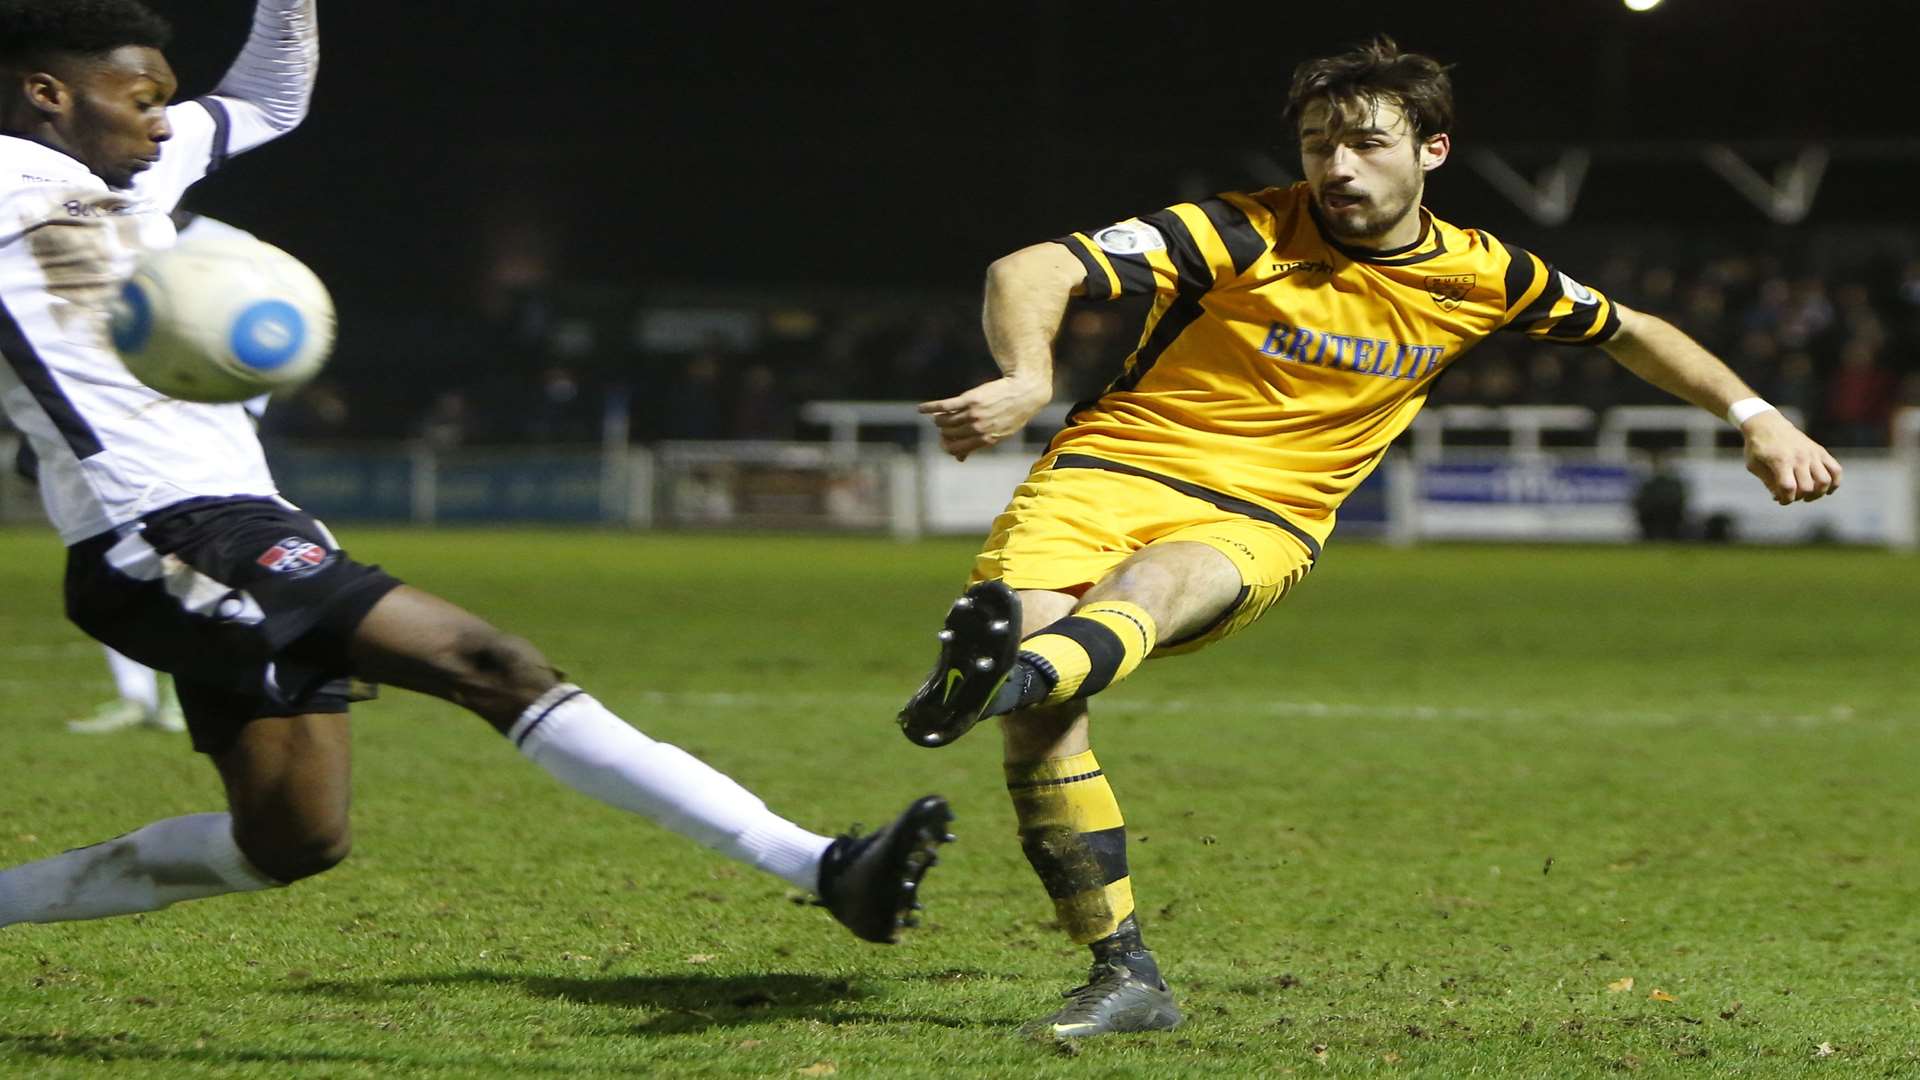 Tom Mills in action for Maidstone Picture: Andy Jones